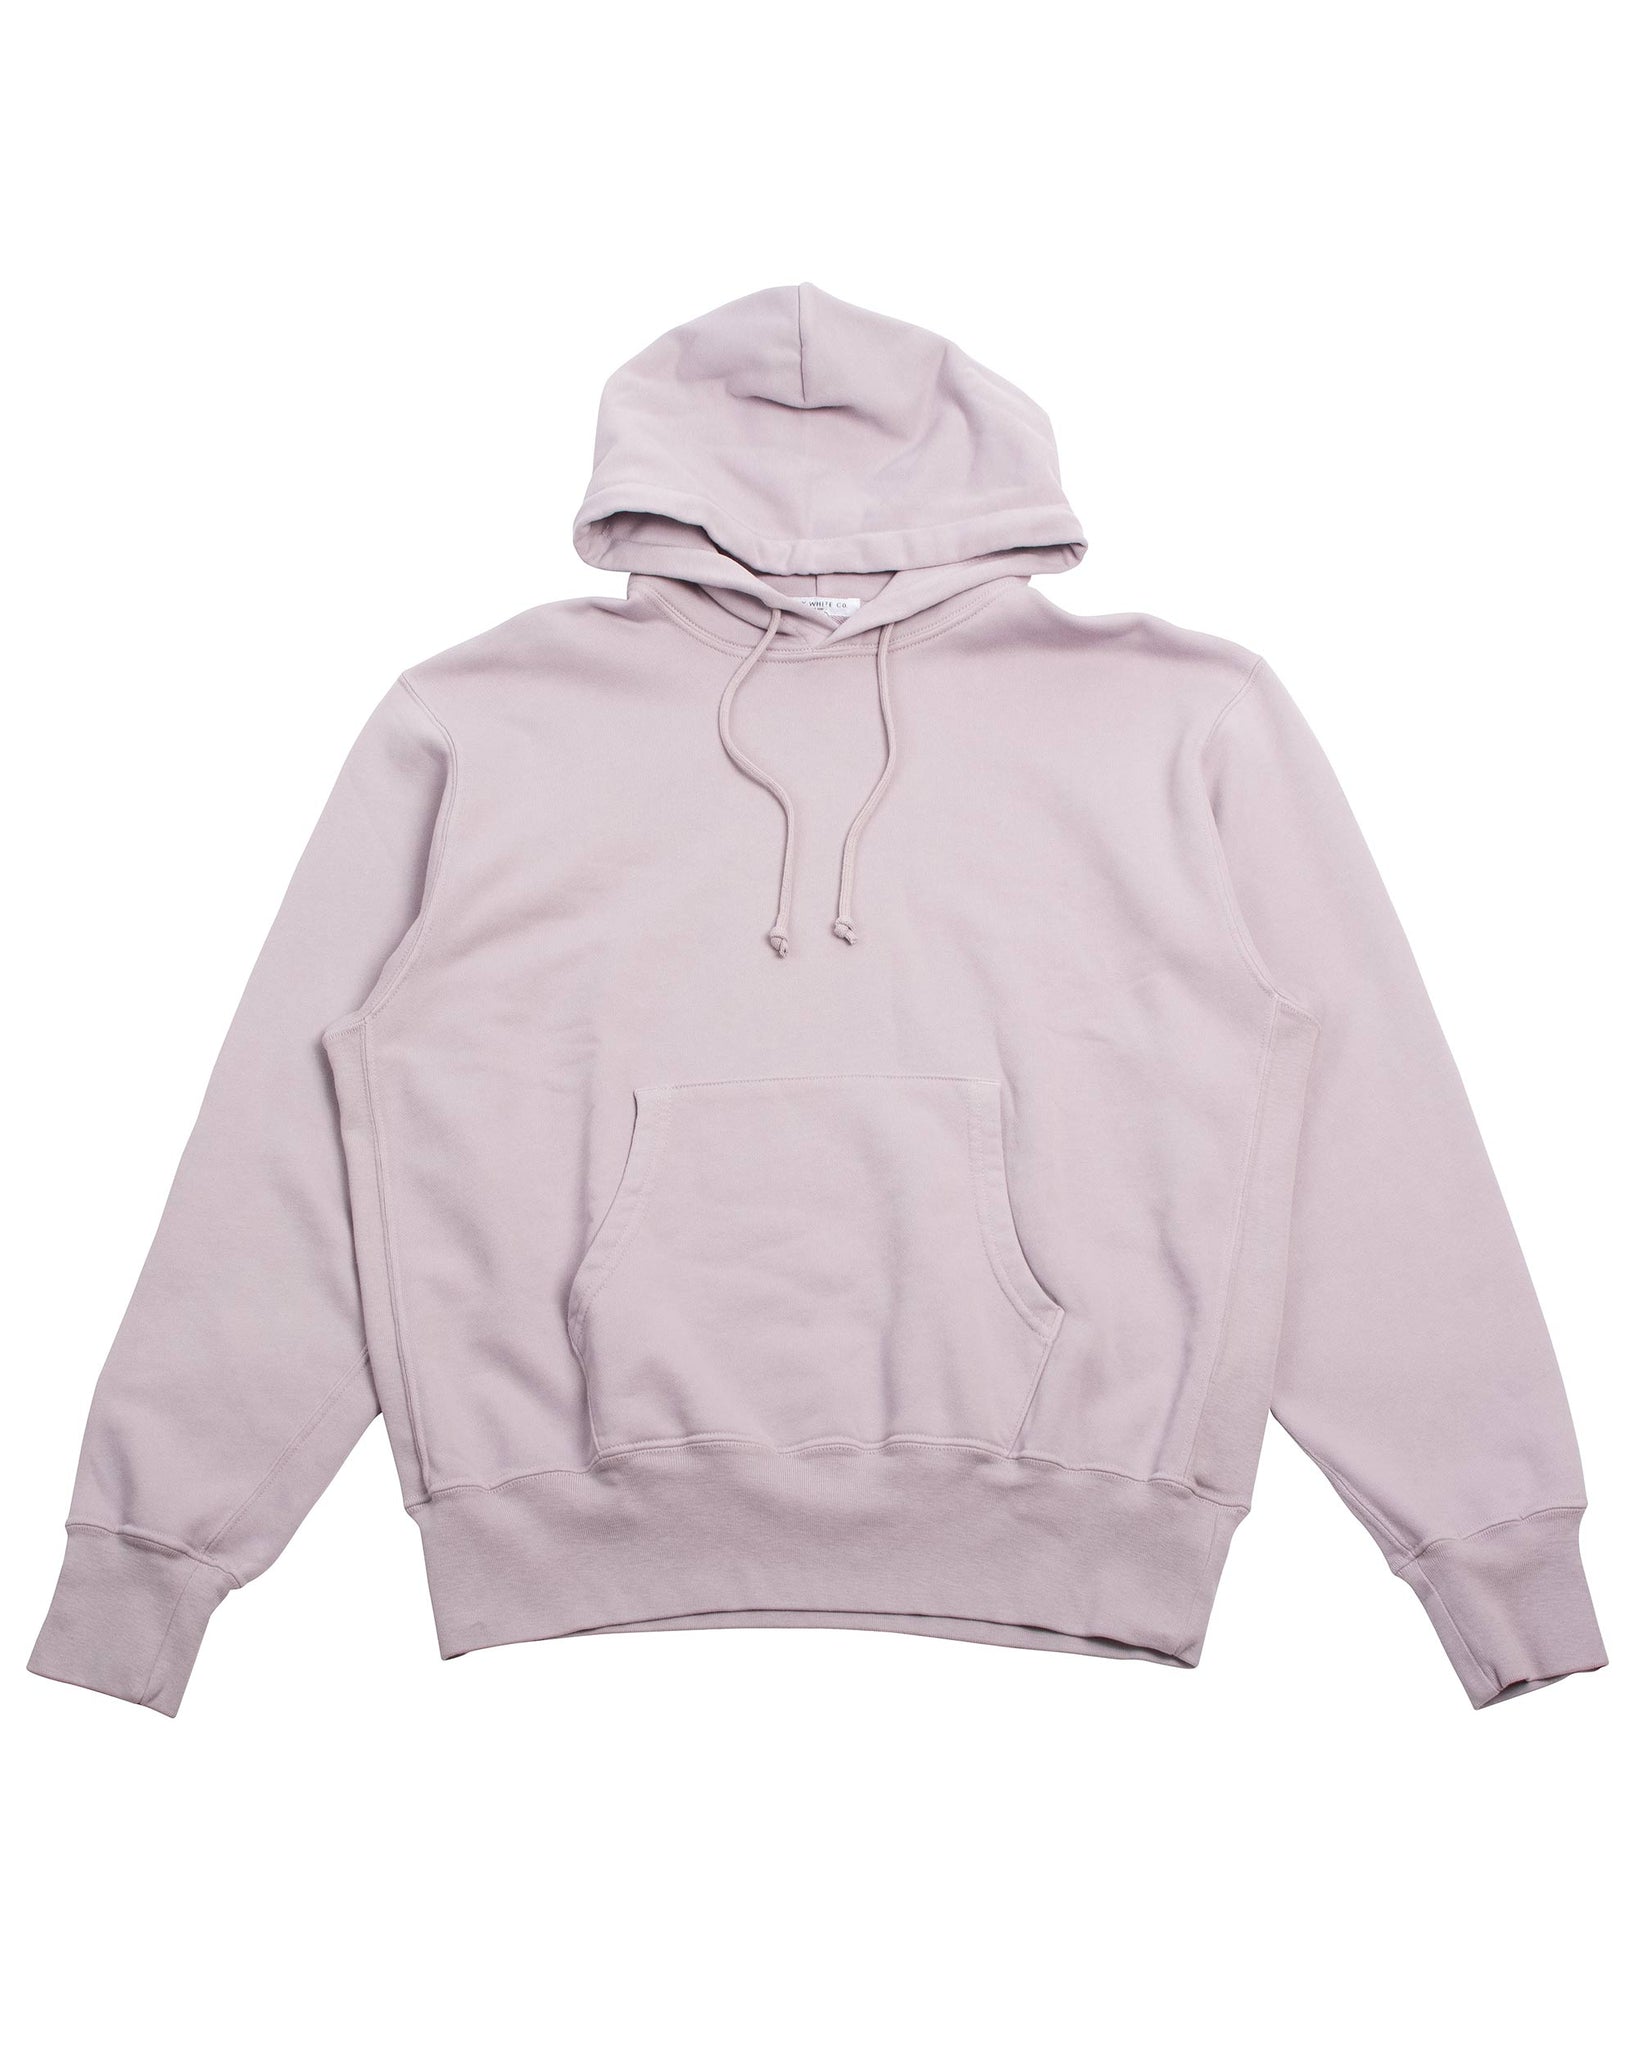 Lady White Co. Classic Fit Hoodie Greyish Mauve